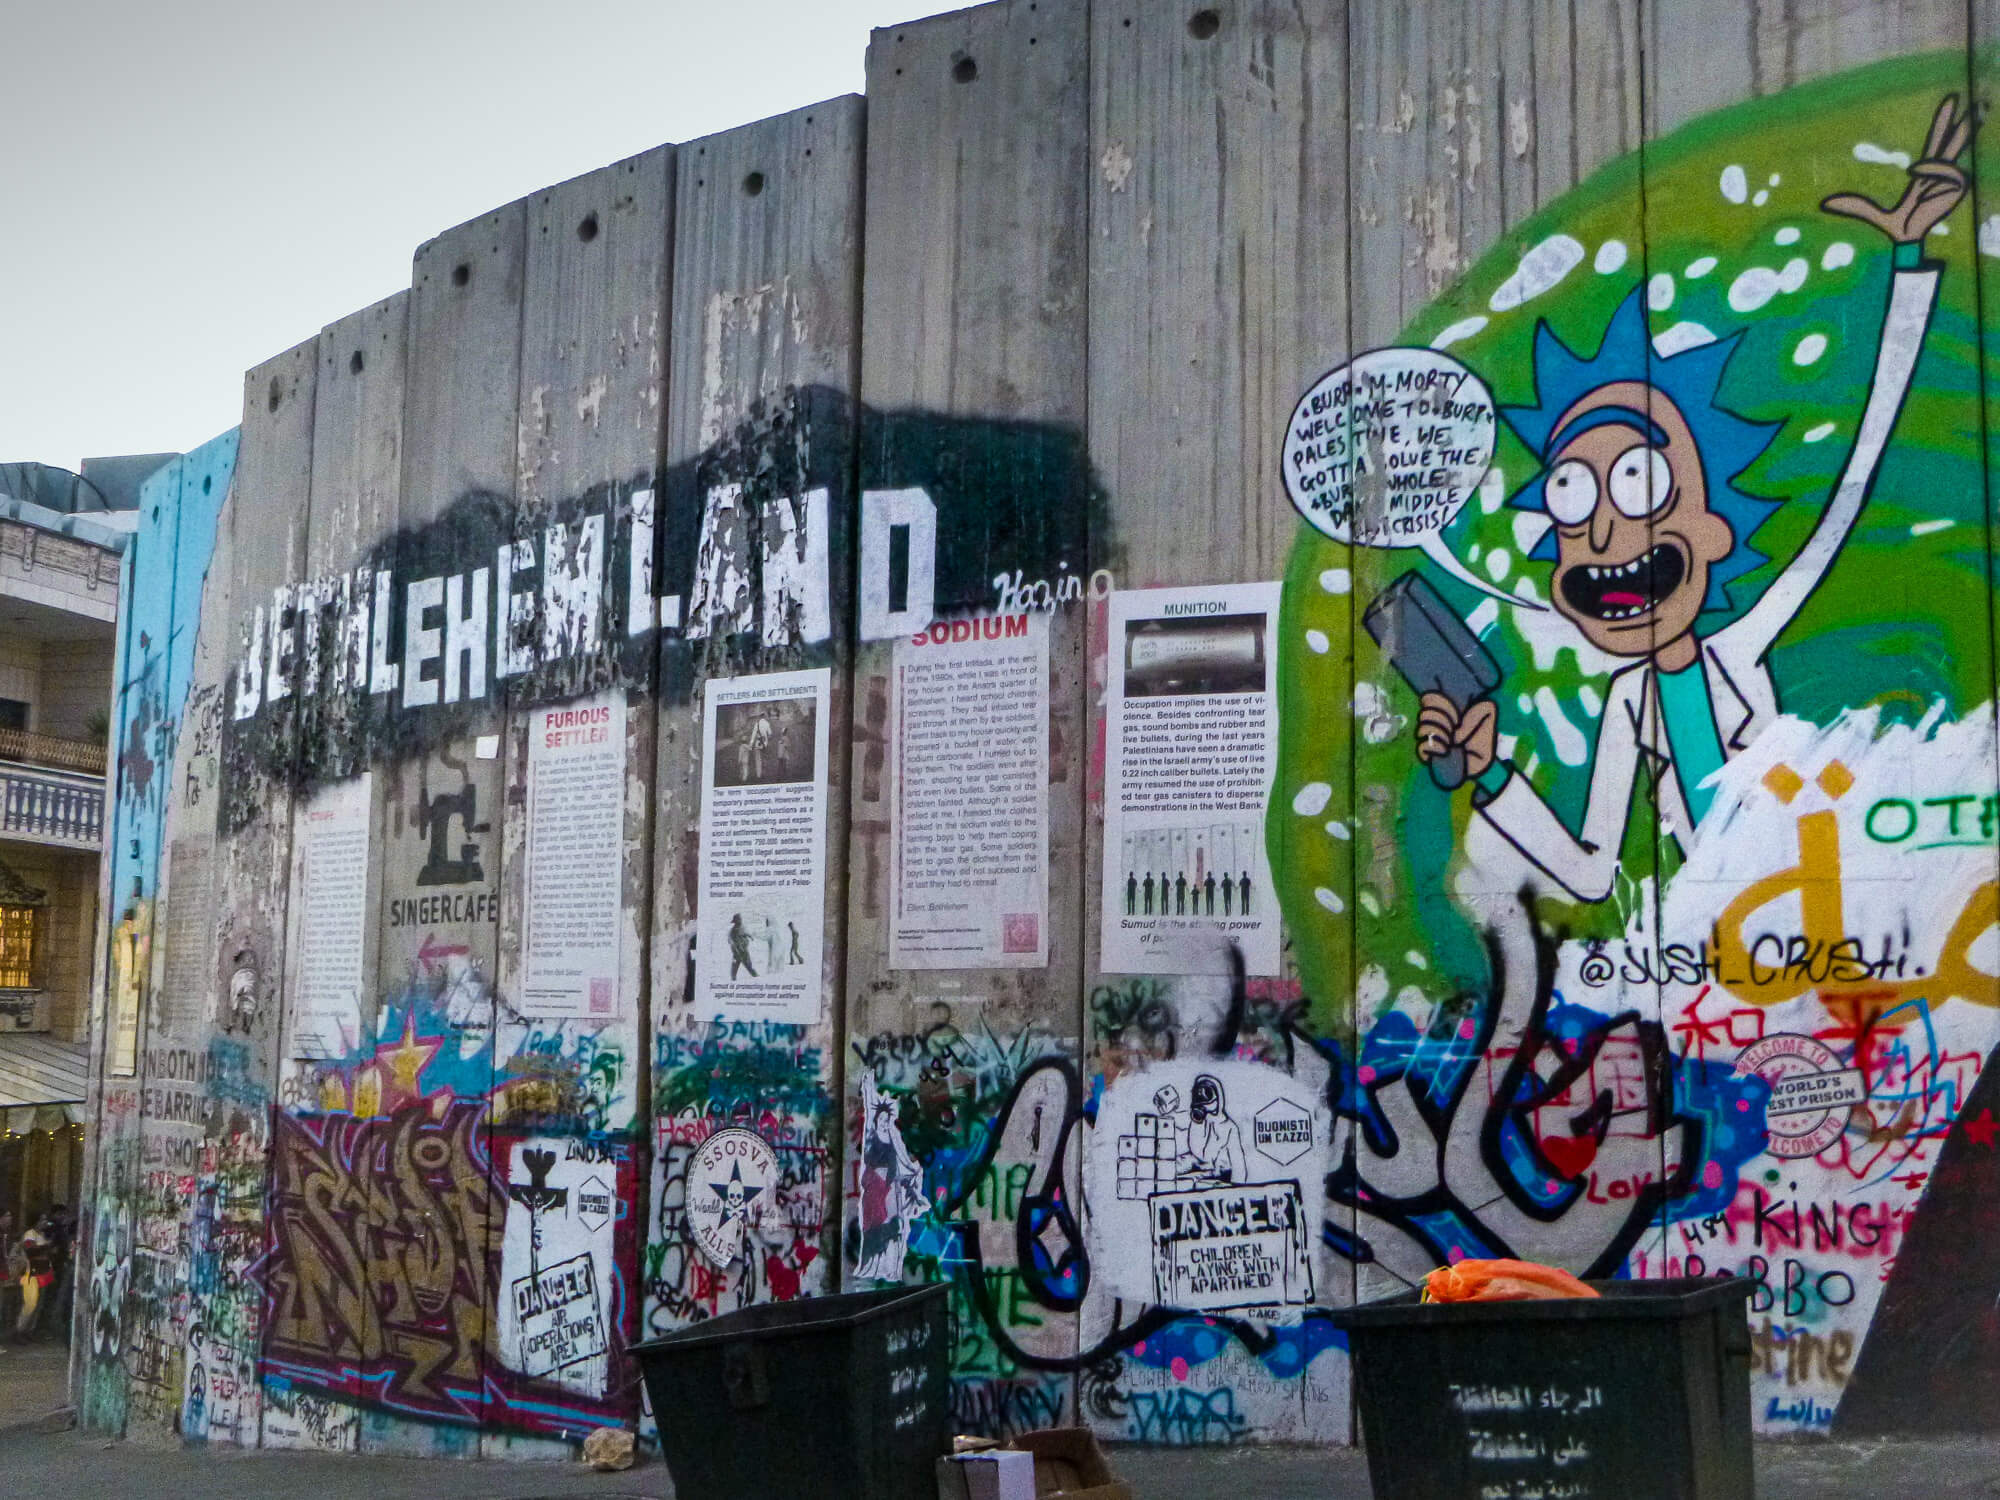 The occupation wall at Bethlehem - A famous place in Israel and Palestine